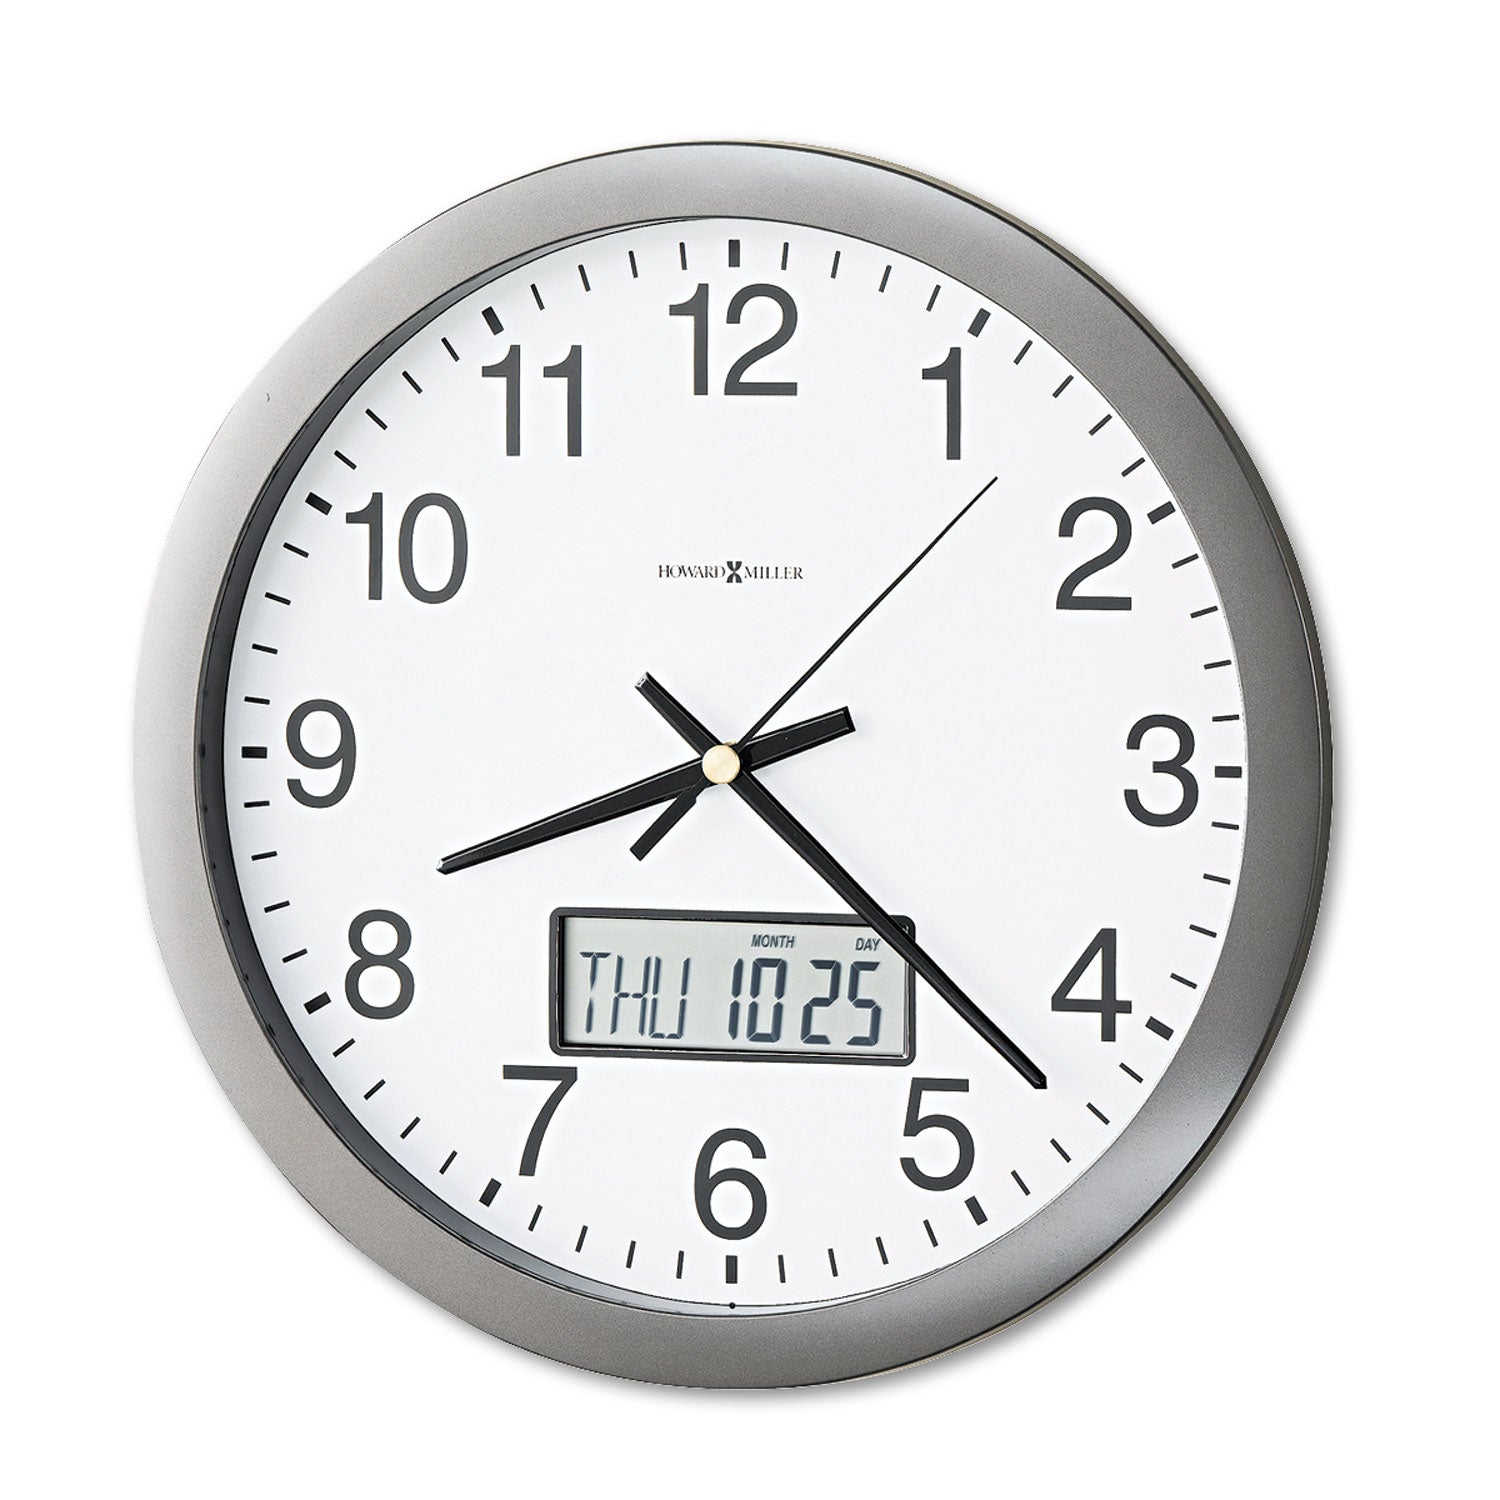 Chronicle Wall Clock with LCD Inset, 14" Overall Diameter, Gray Case, 2 AA (sold separately) - 